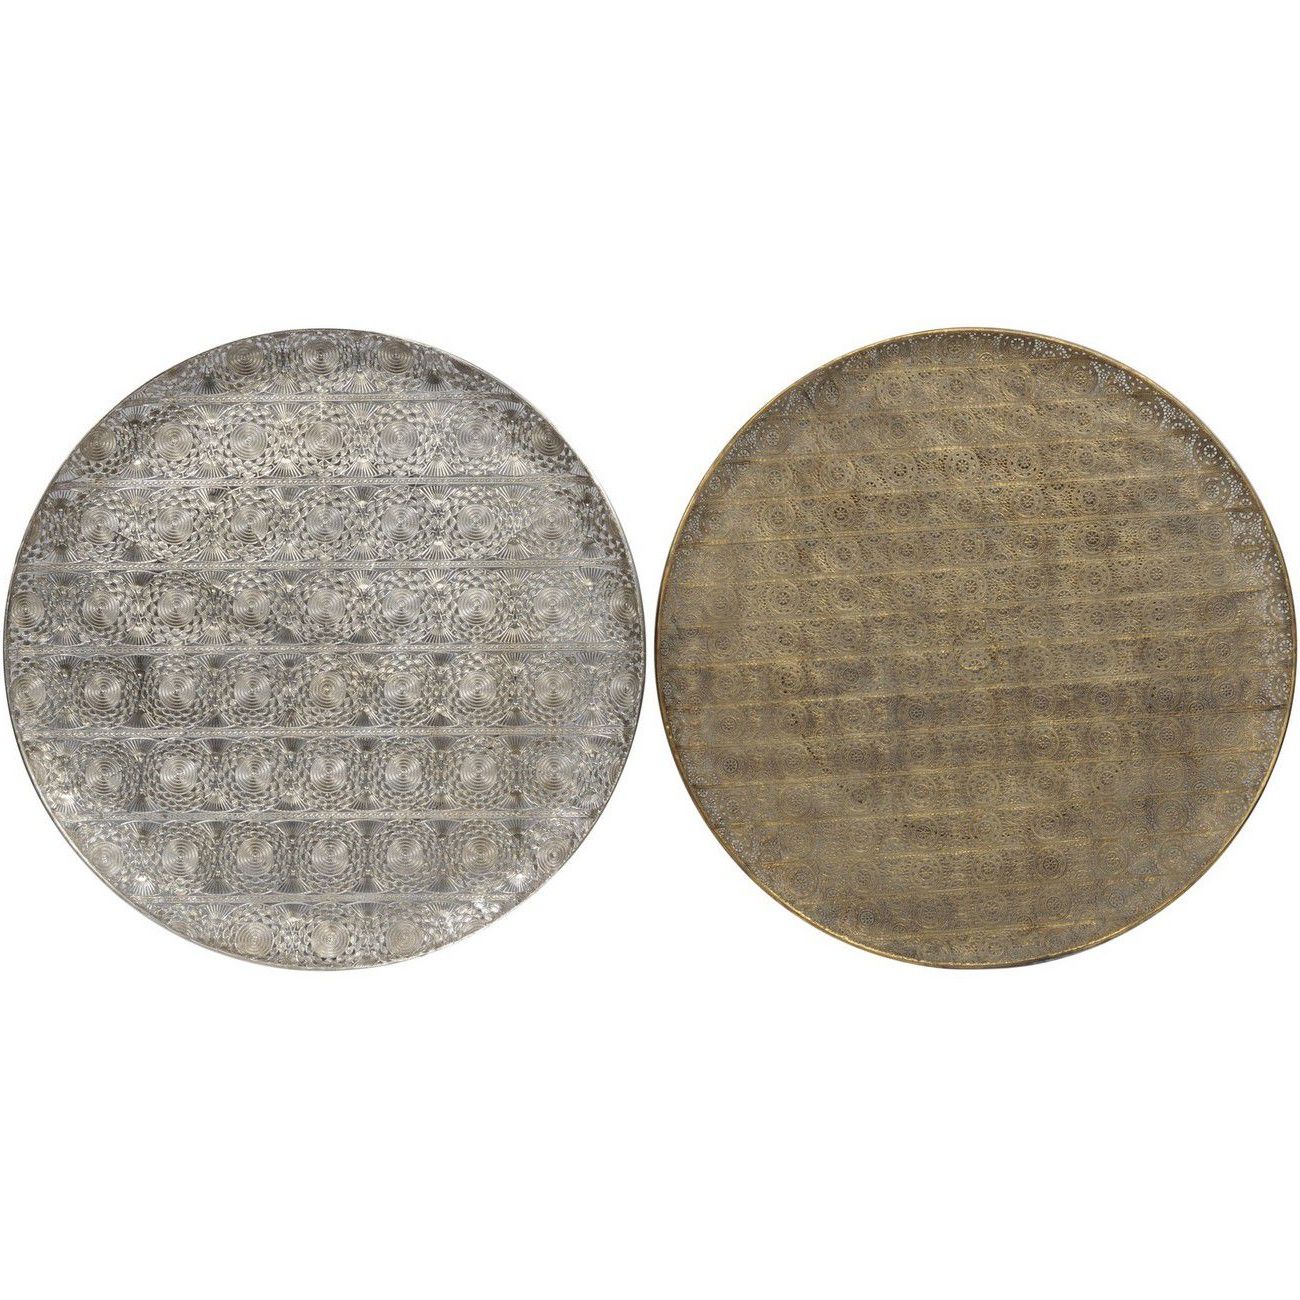 Round Gray Disc Metal Wall Art Pertaining To Widely Used Antique Gold Filigree Wall Disc (View 12 of 15)